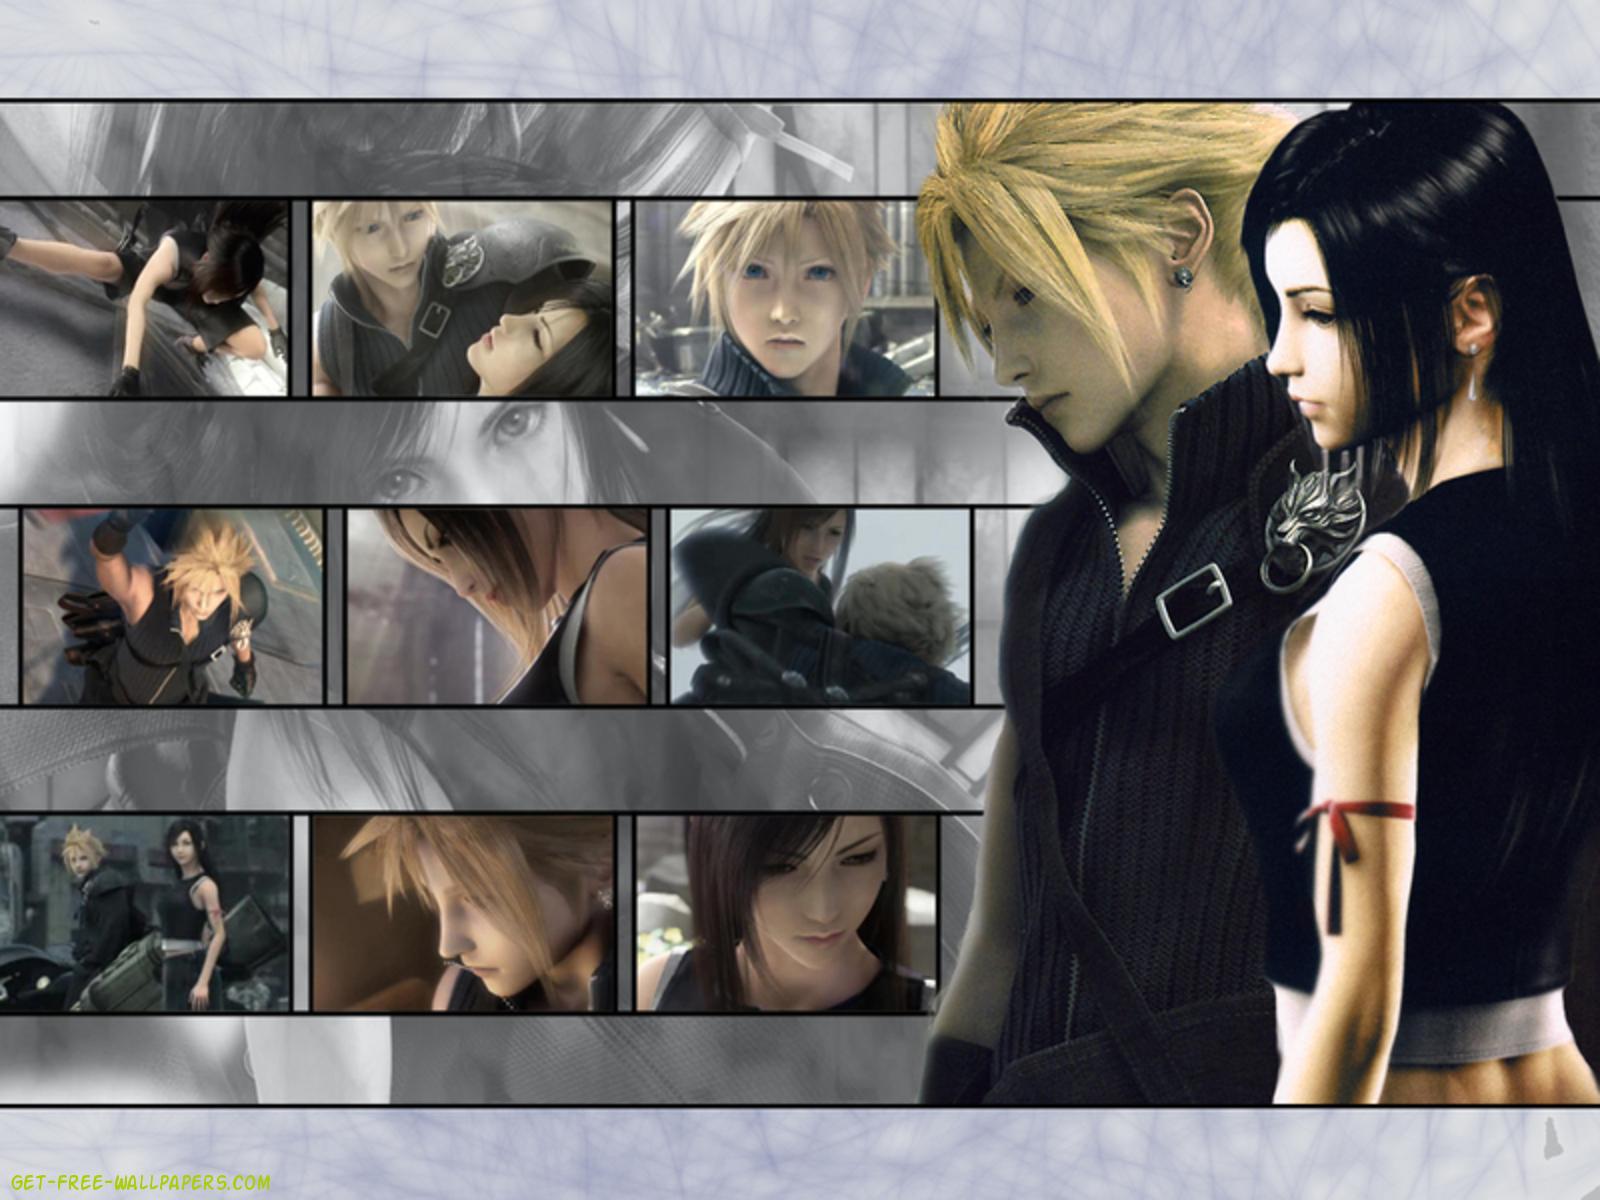 Free Wallpapers Pictures cloud wallpaper Download Final Fantasy Tifa